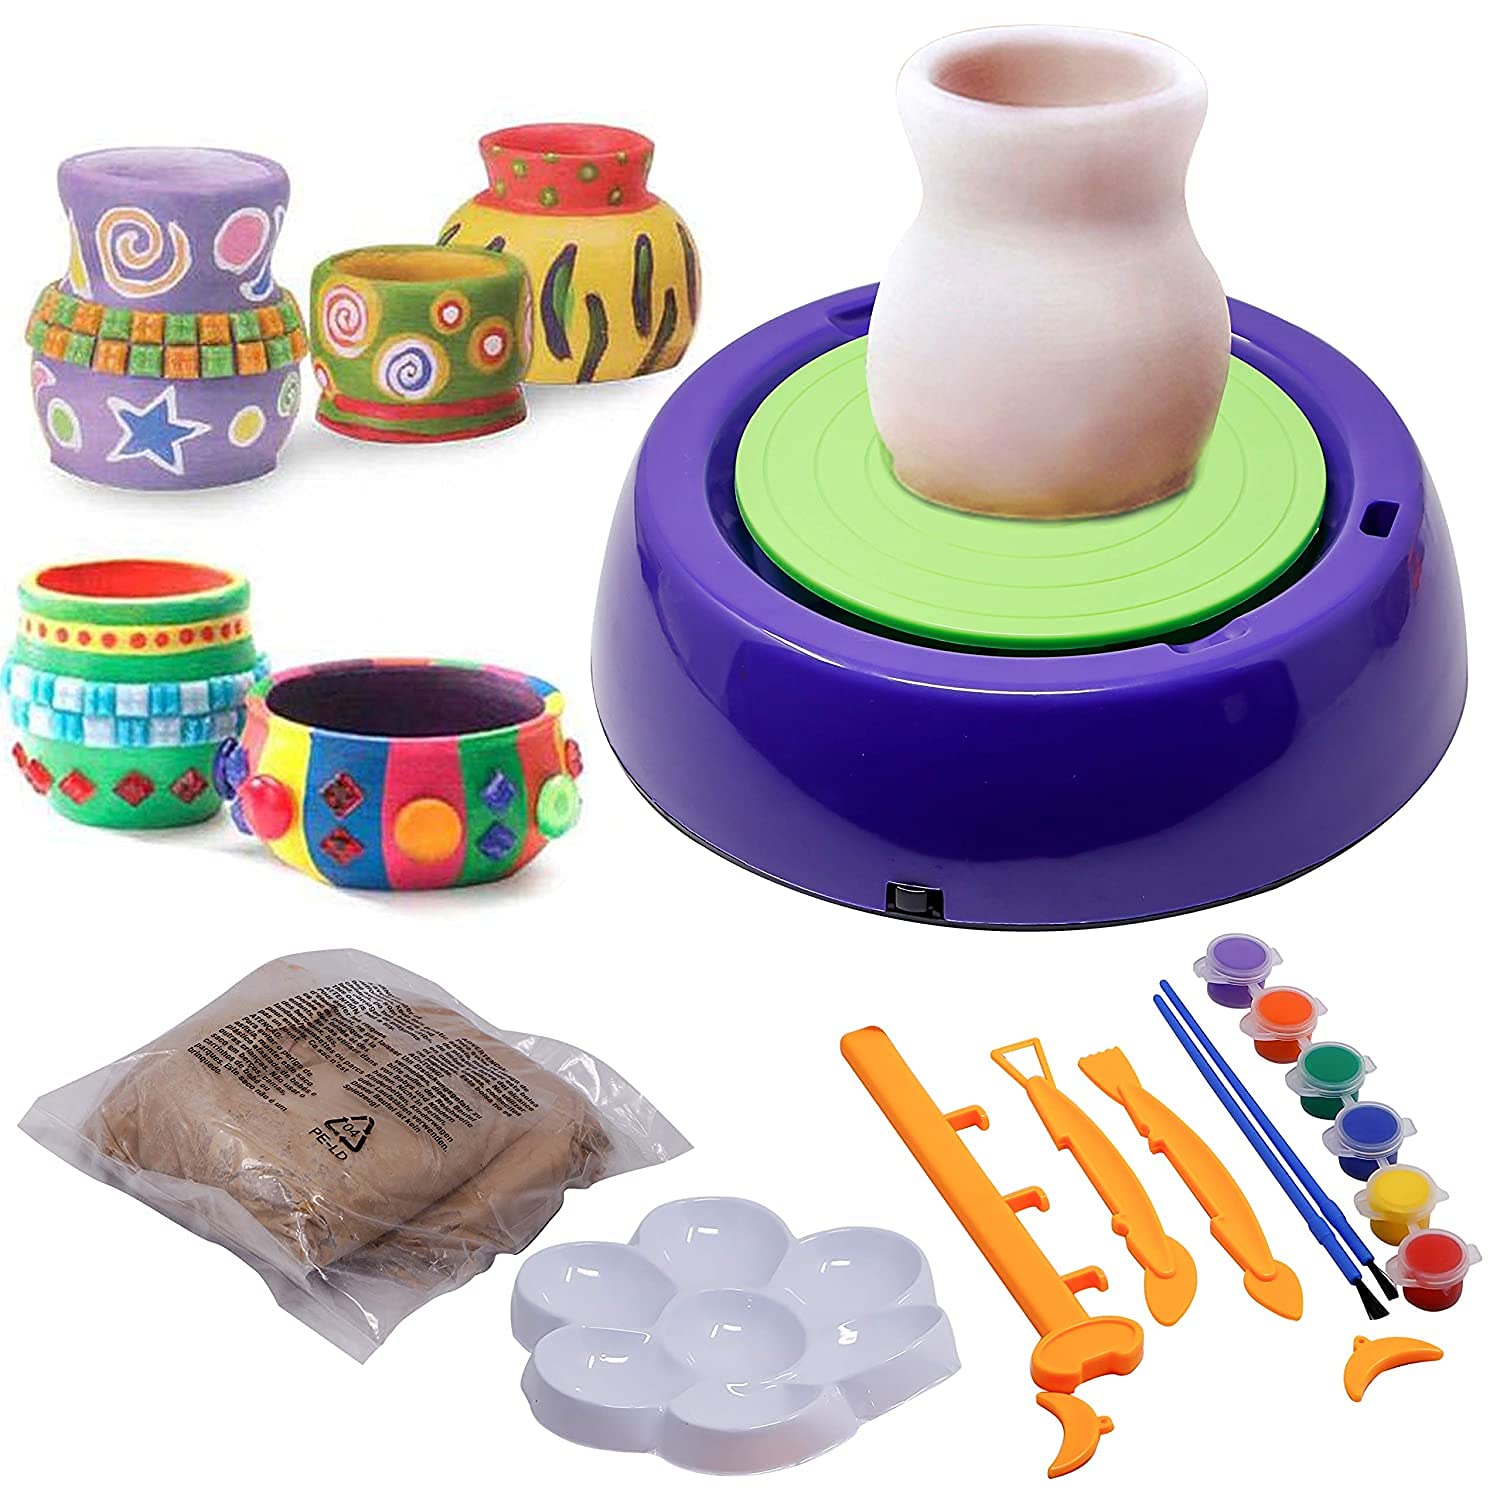 Best of Sculpd  Pottery kit, Clay diy projects, Pottery